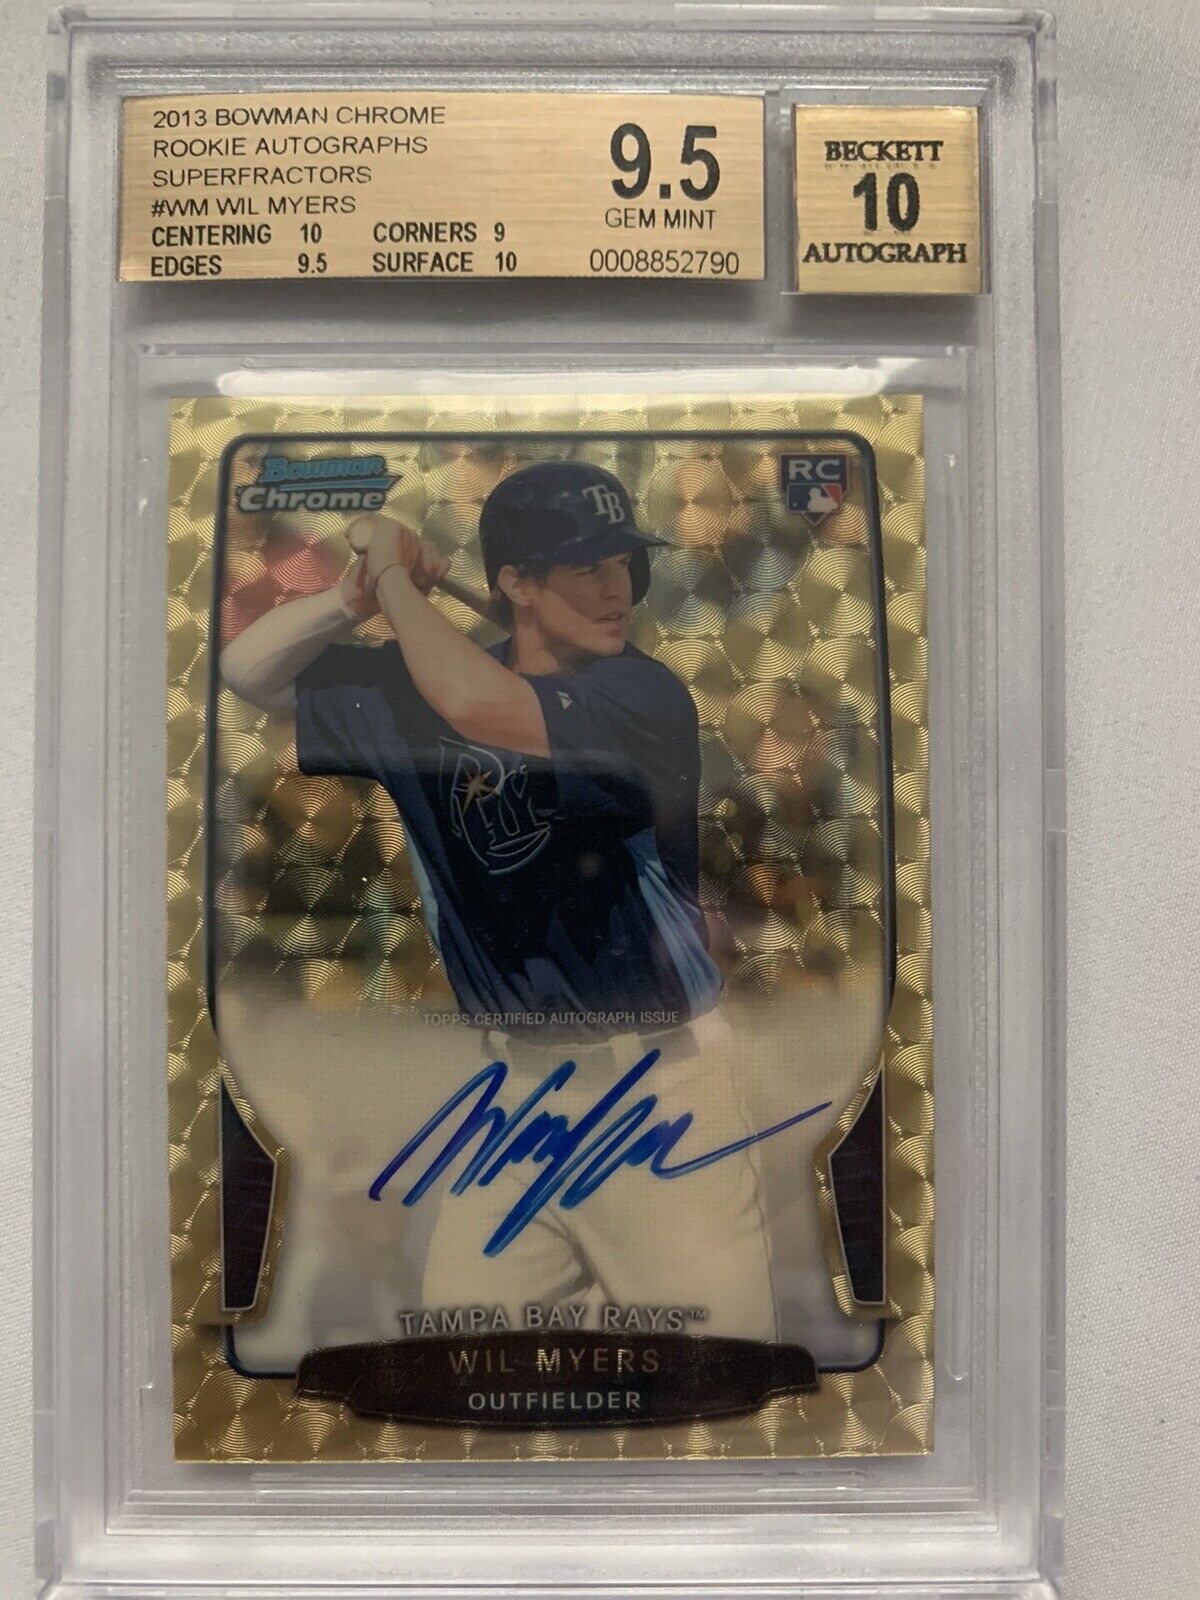 Wil Myers 2013 Bowman Chrome SUPERFRACTOR AUTO RC ROOKIE #1/1  BGS 9.5 / 10